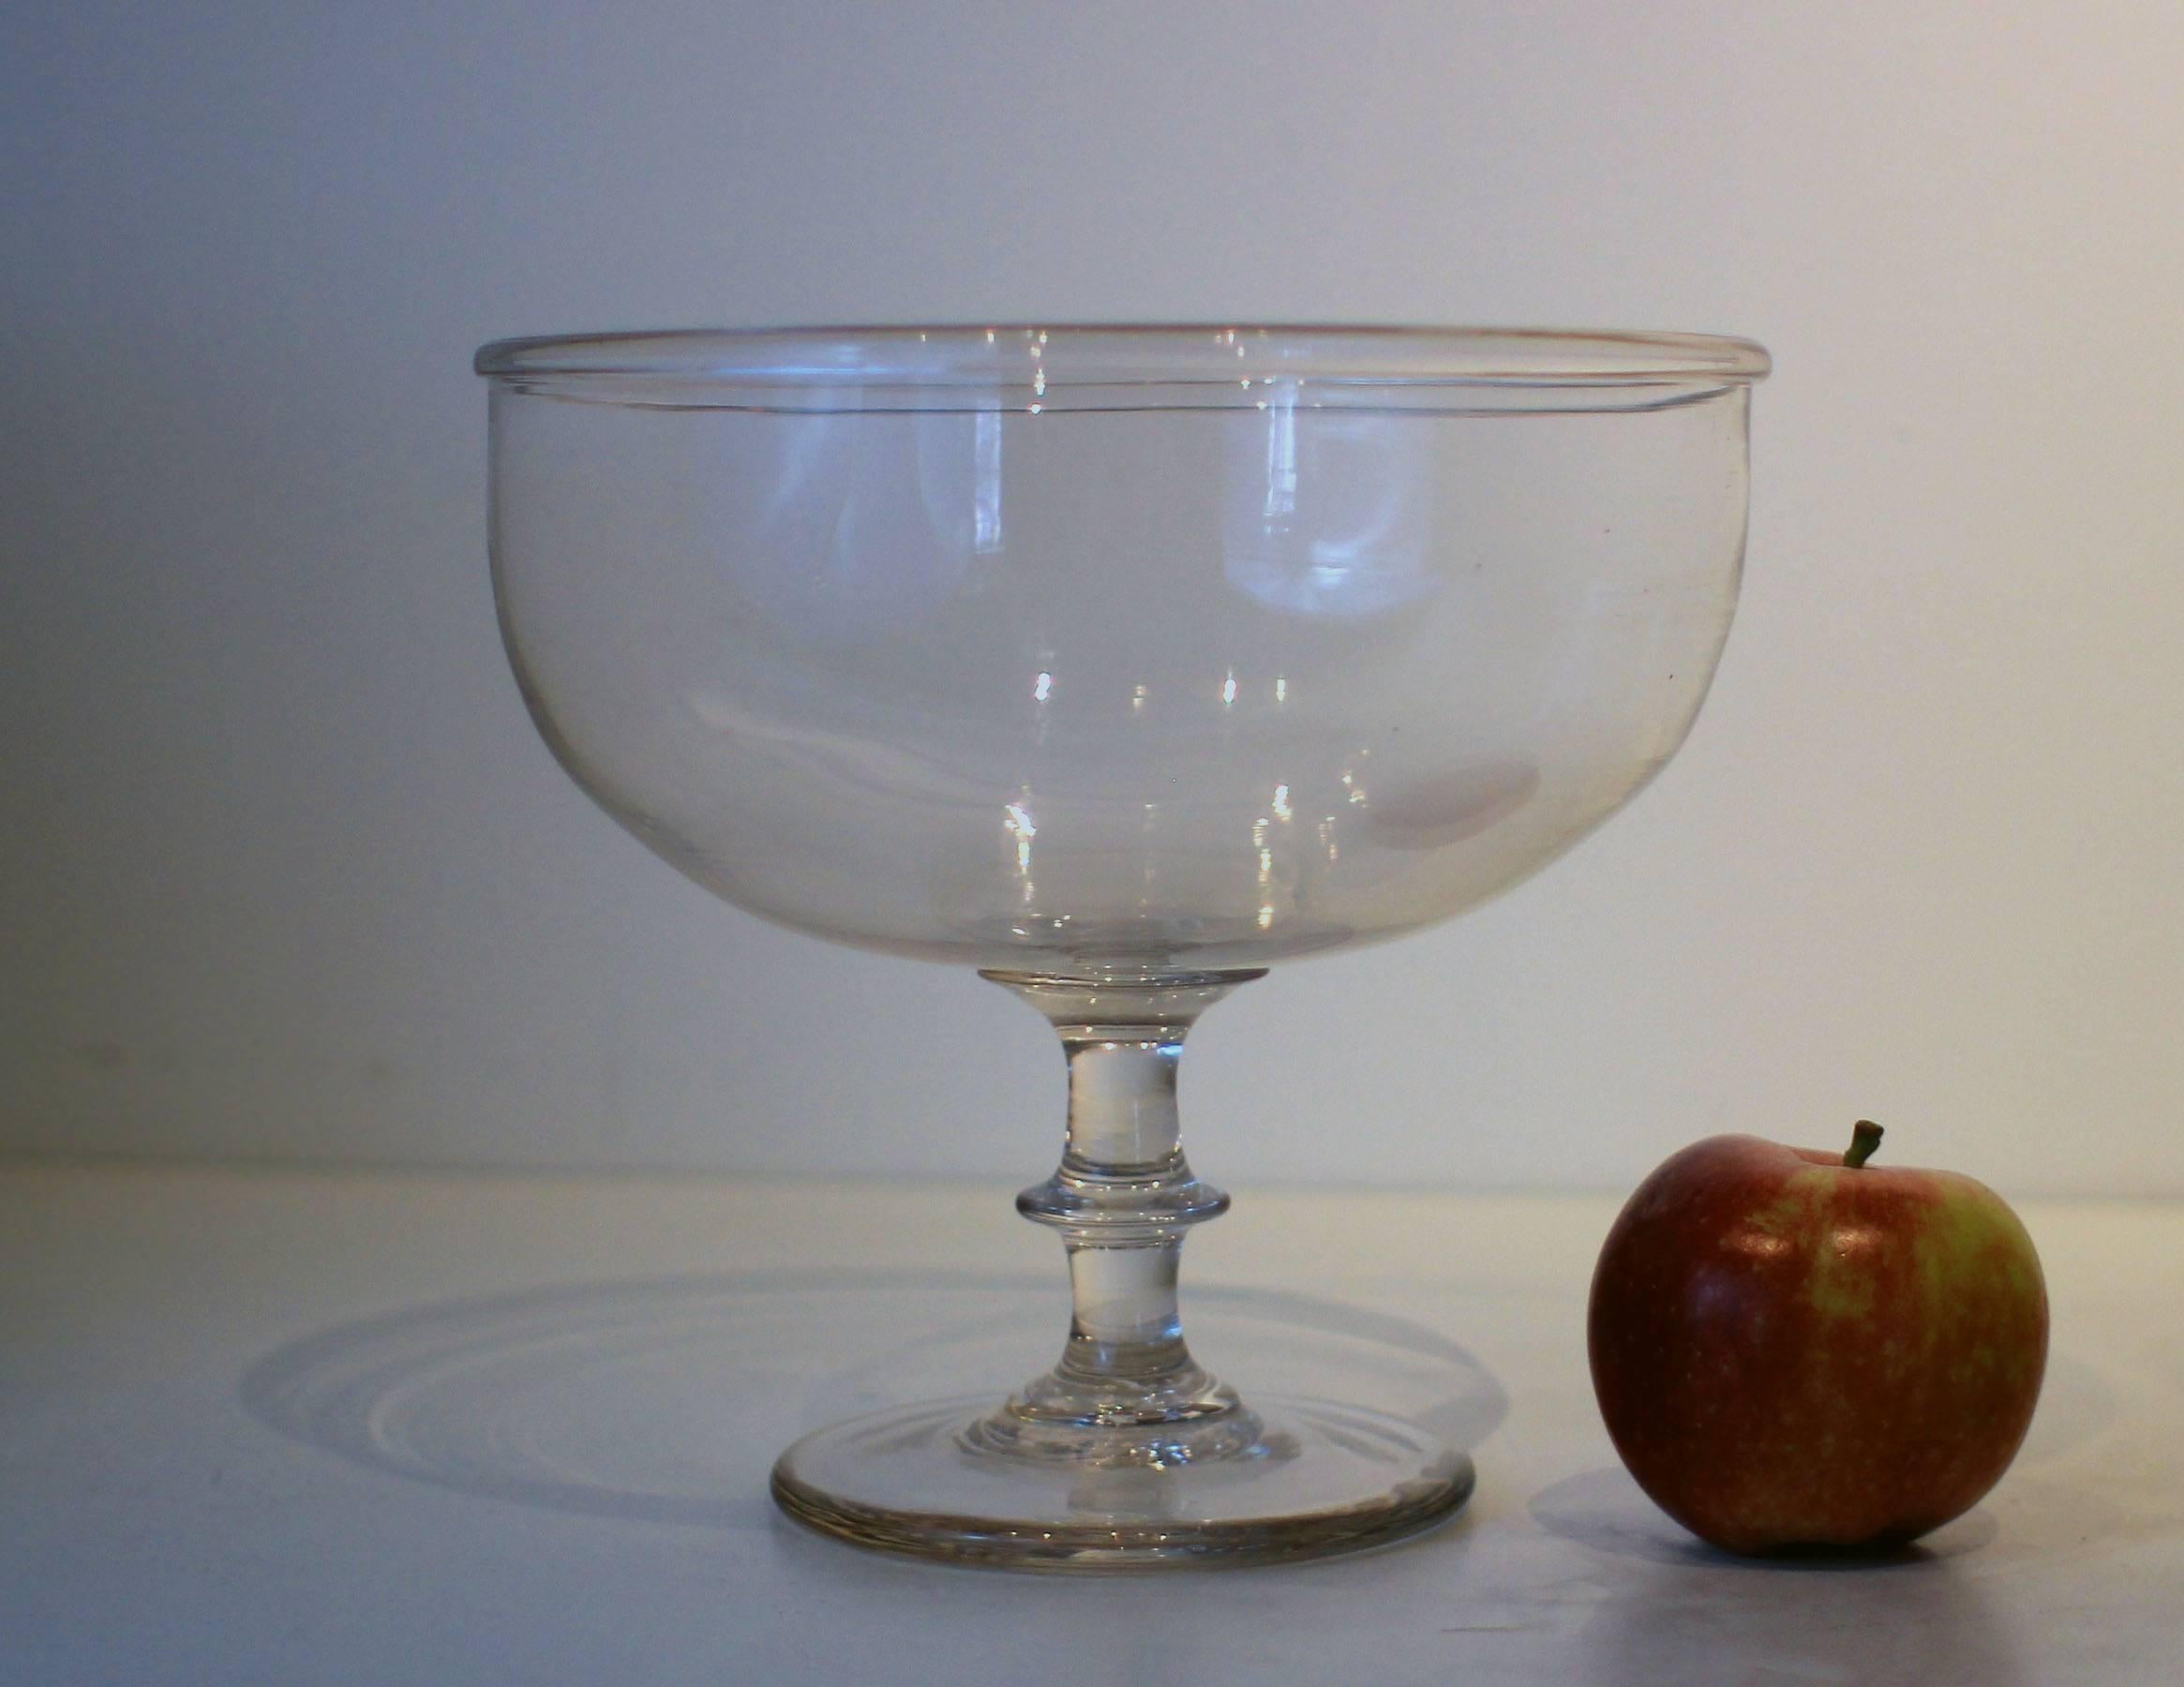 Very fine blown glass compote with a deep bowl and an applied base and rolled rim, from the early 19th century, New England, probably Massachusetts. Very good lines, crisp detail, excellent condition.